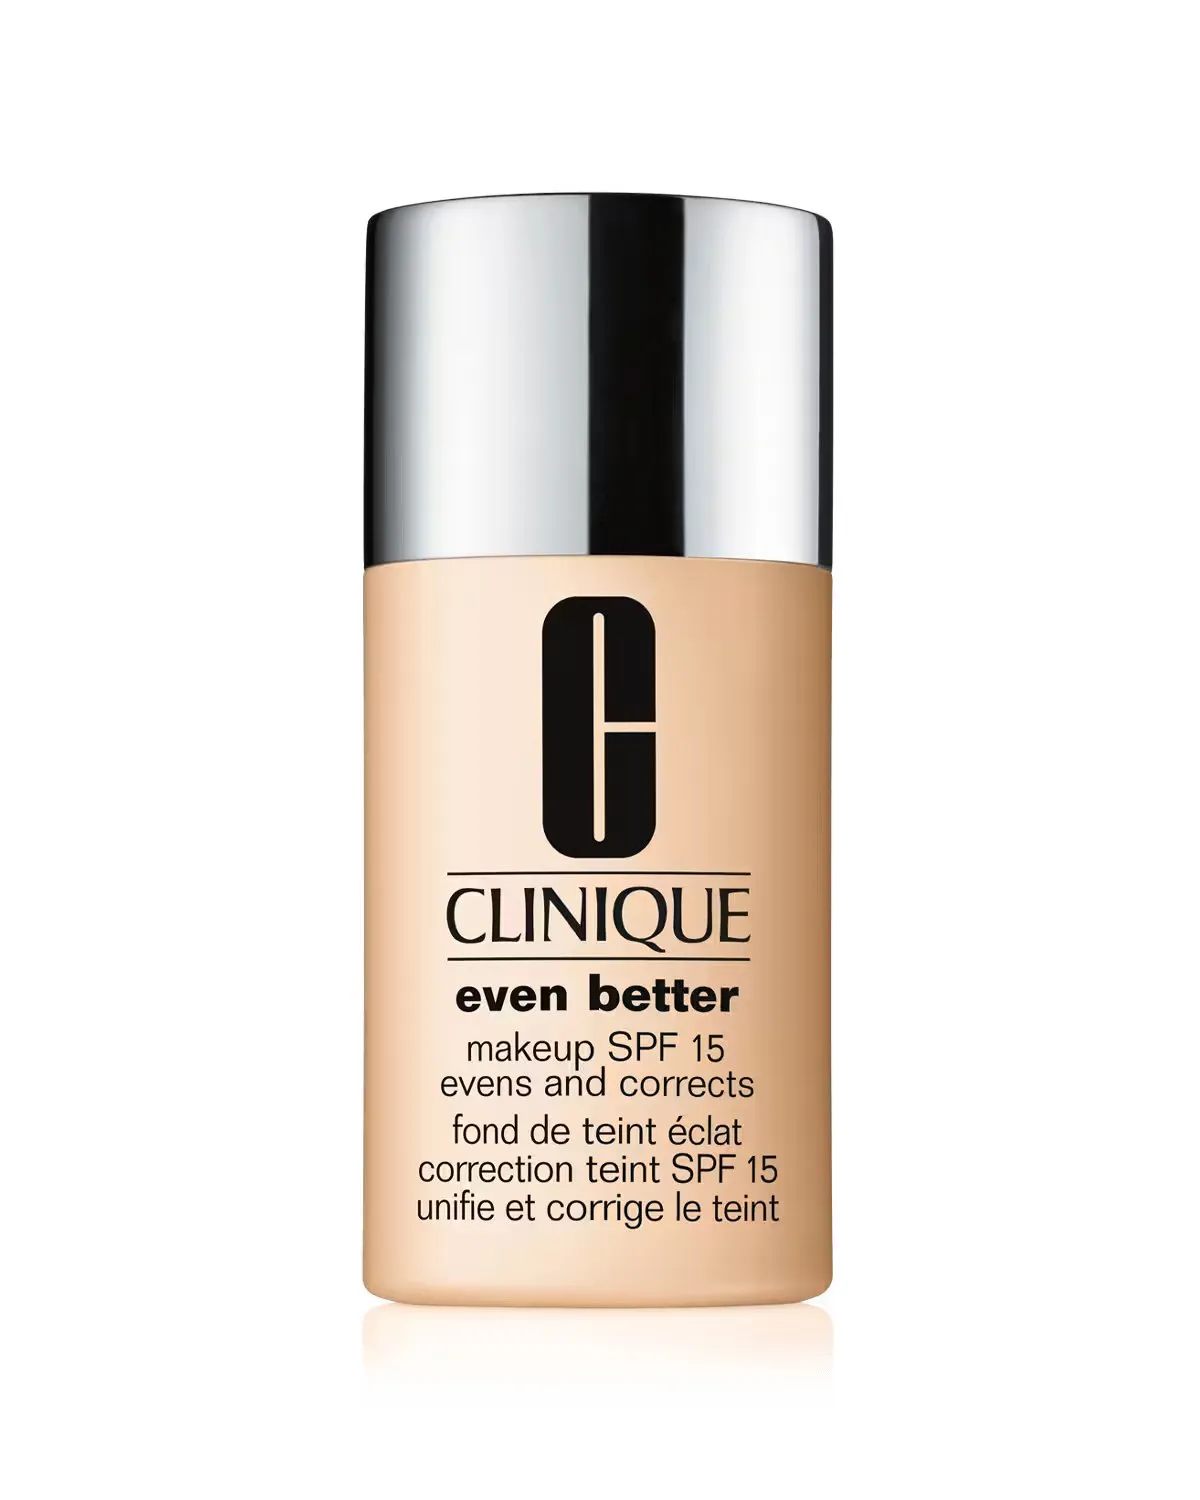 FEMMENORDIC's choice in the Clinique Beyond Perfecting vs Even Better comparison, the Clinique Even Better Makeup SPF15.